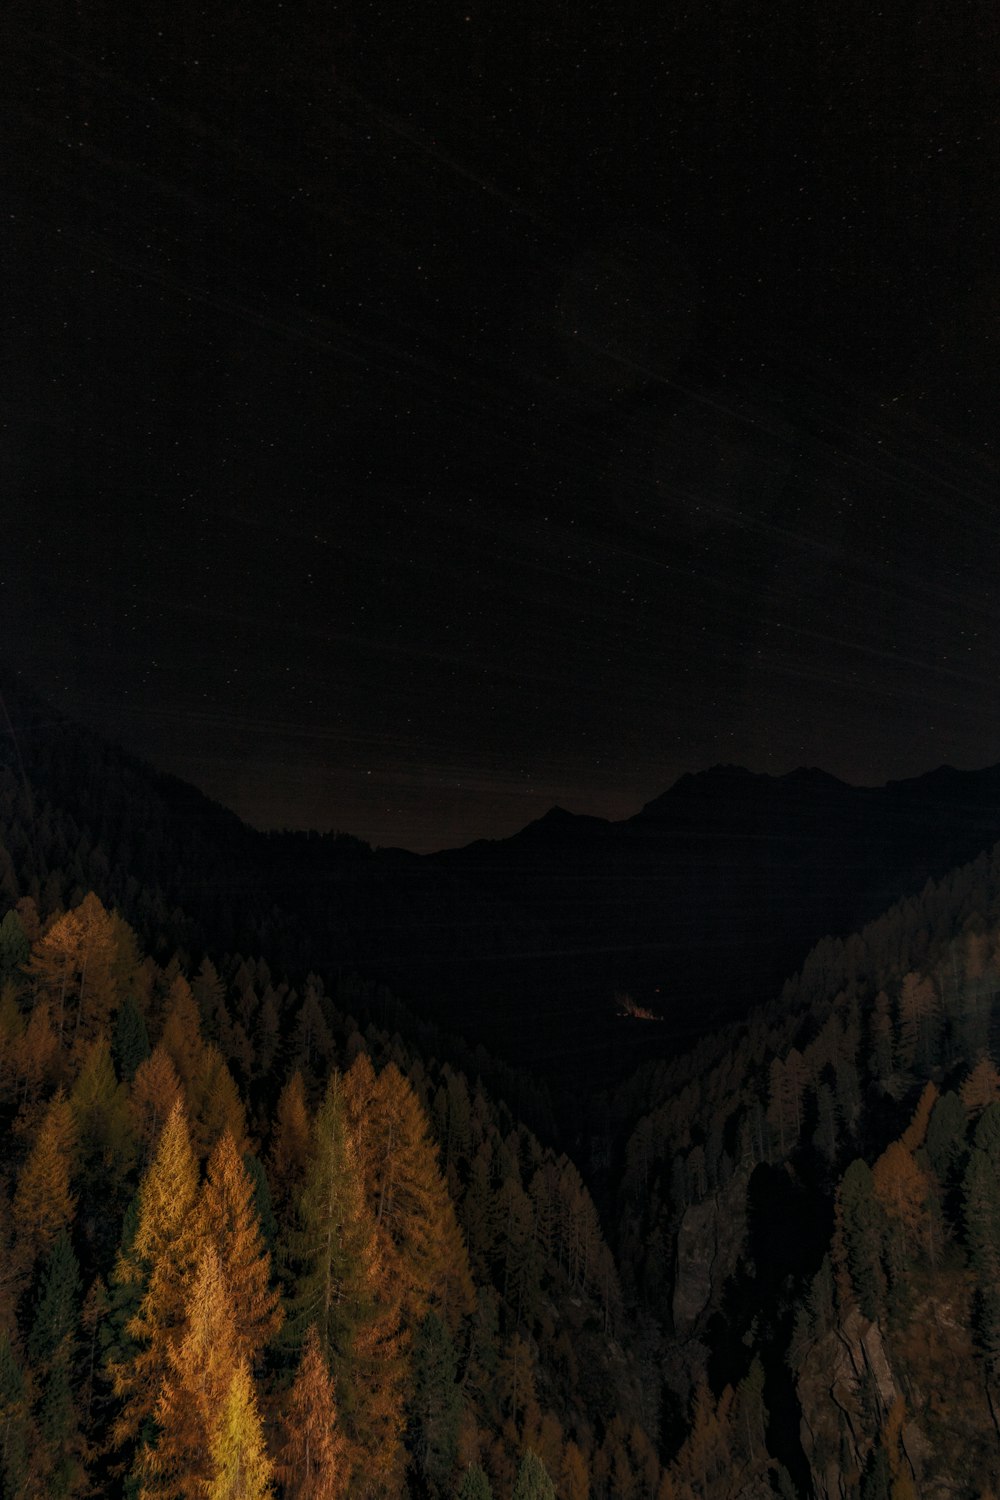 a view of a forest at night from a high point of view